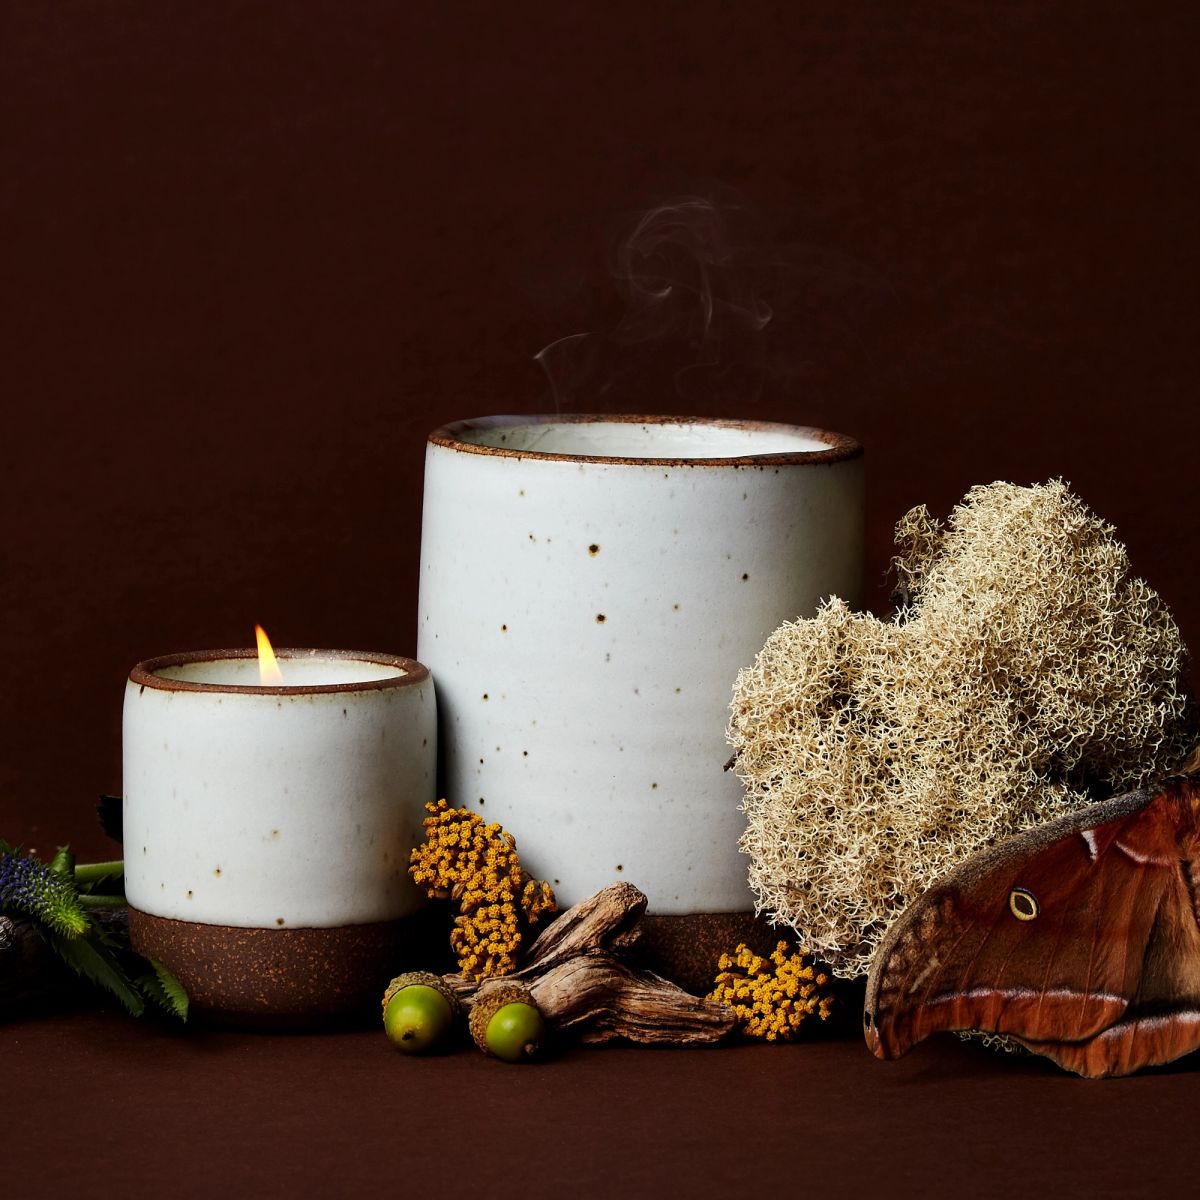 A large and small cool white ceramic candle lit against a dark brown background. Surrounded by elements of nature like dried foliage and a moth.